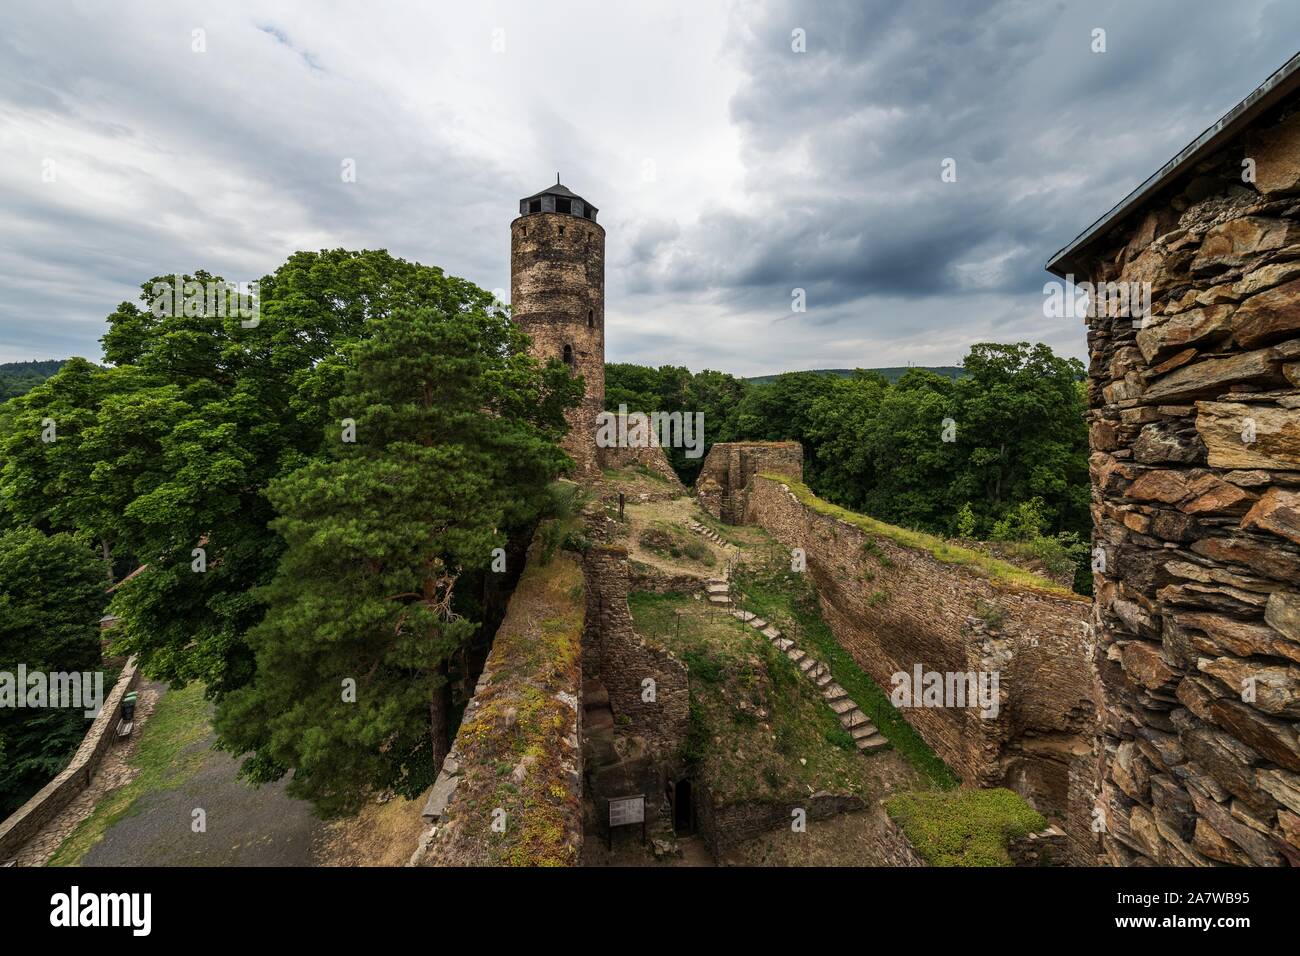 The ruins of Hasistejn Castle in the Krusne Mountains. It is one of the oldest castles in northwest Bohemia Stock Photo